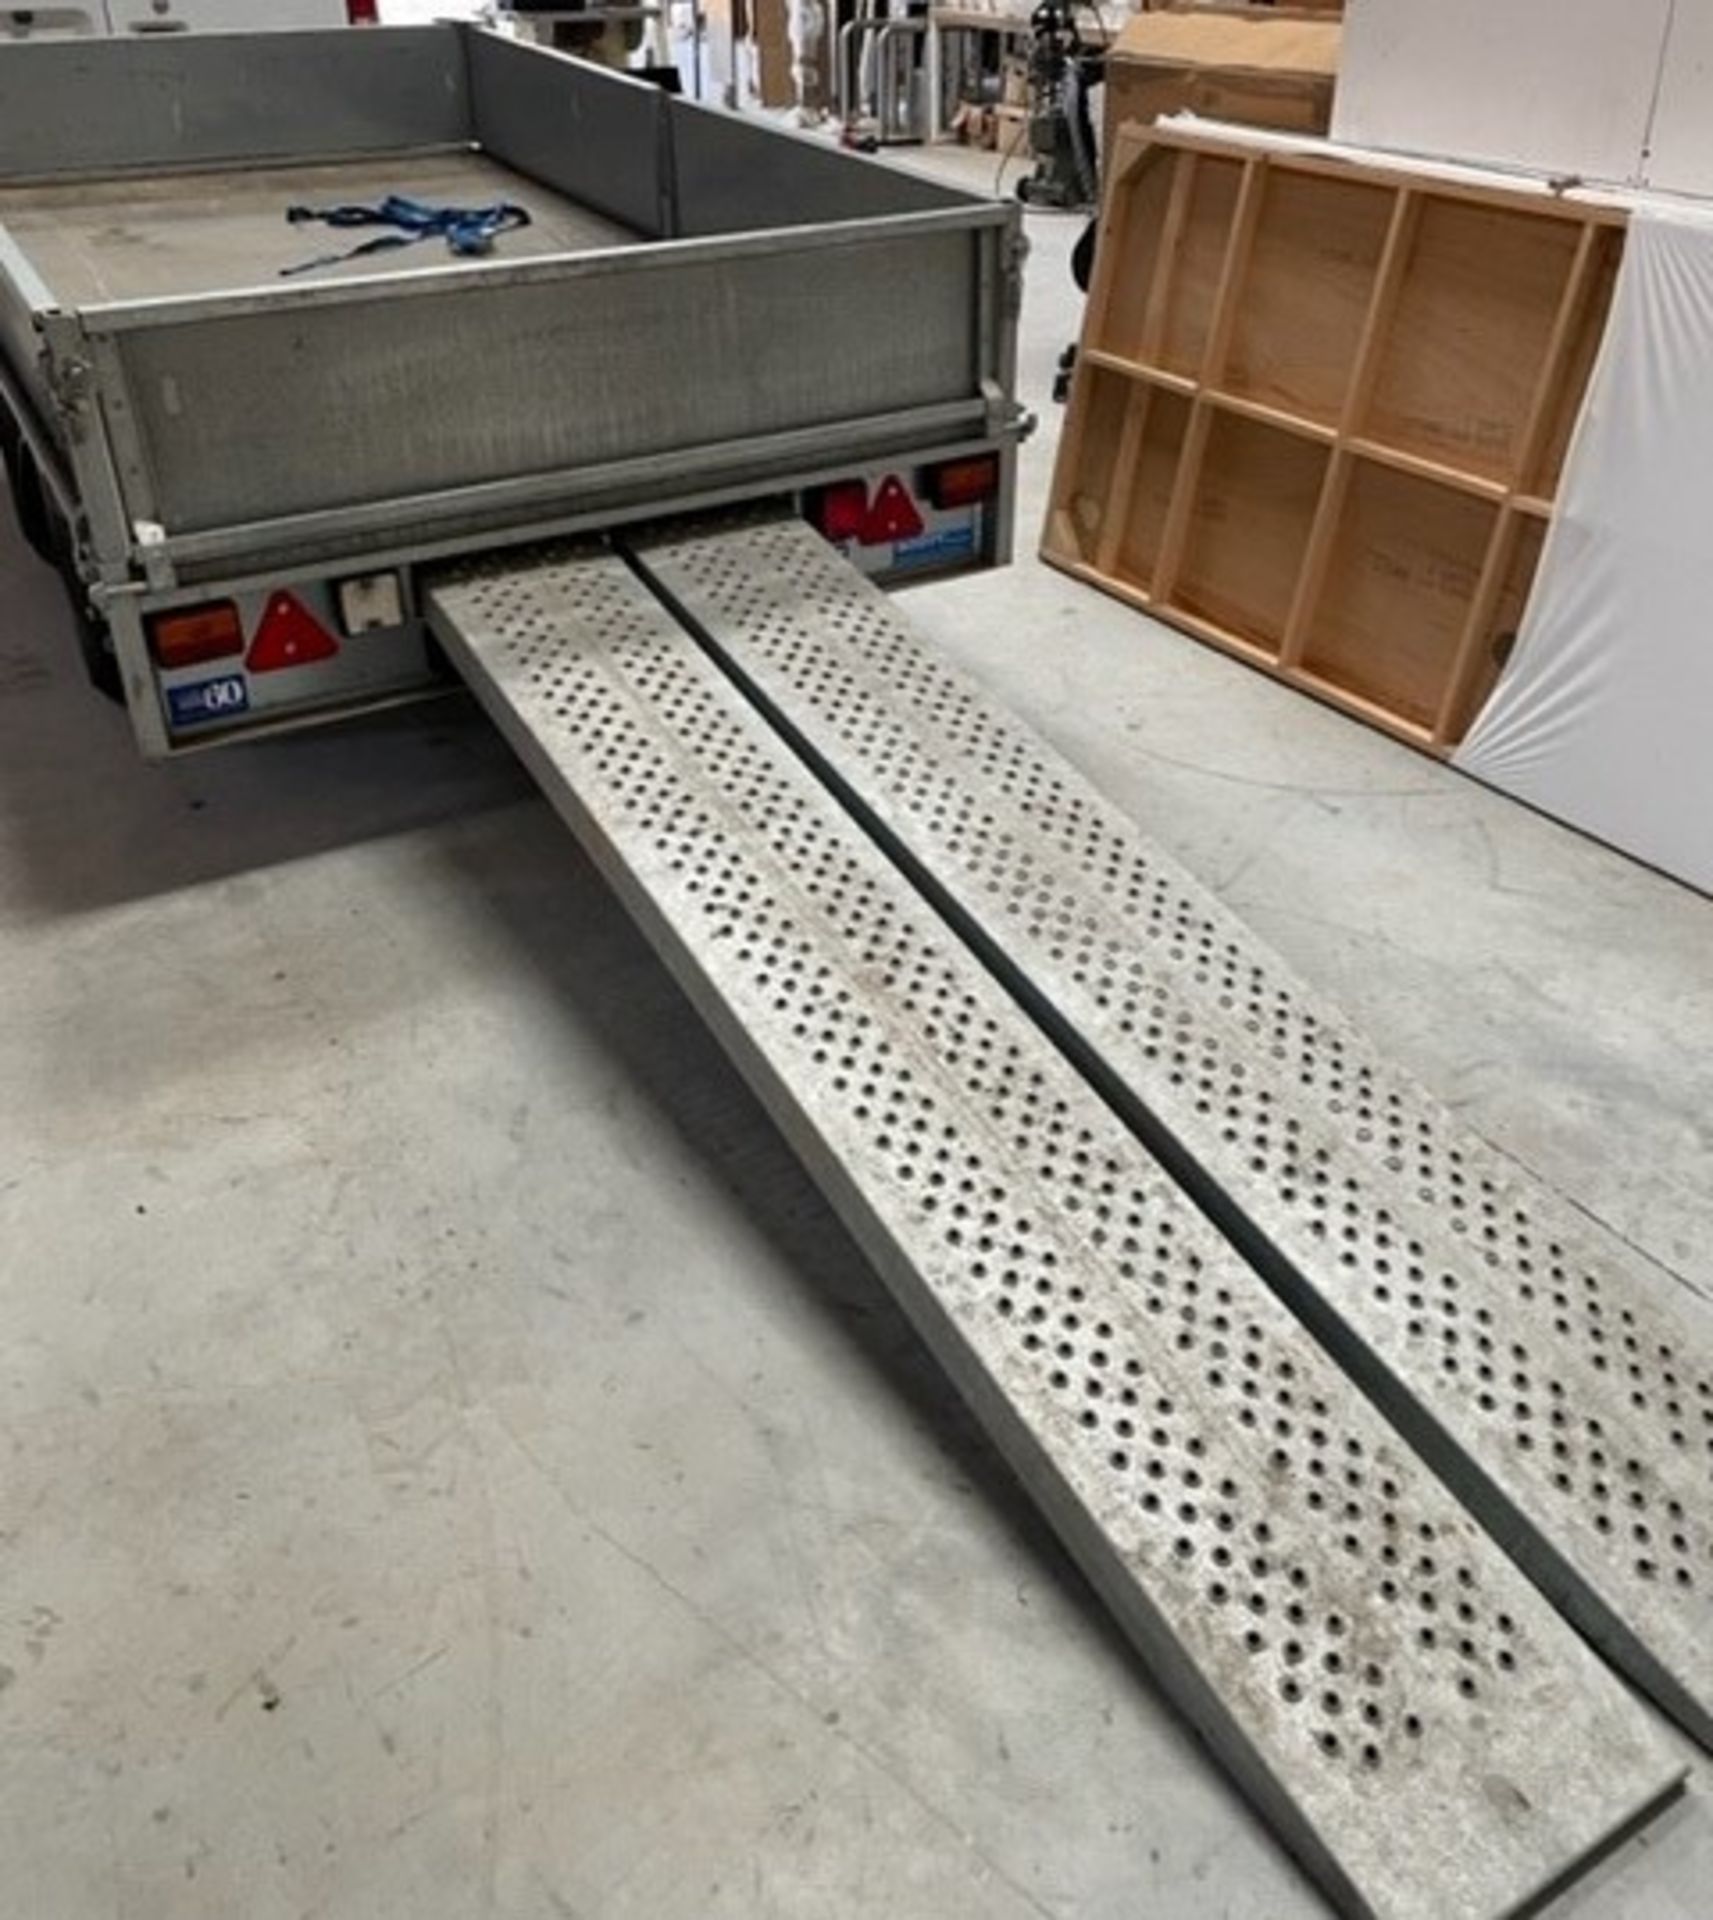 Ifor Williams Type 2Cb LT105G Twin Axle Trailer, Serial Number; 5159713, Manufactured Nov 2018, - Image 9 of 10